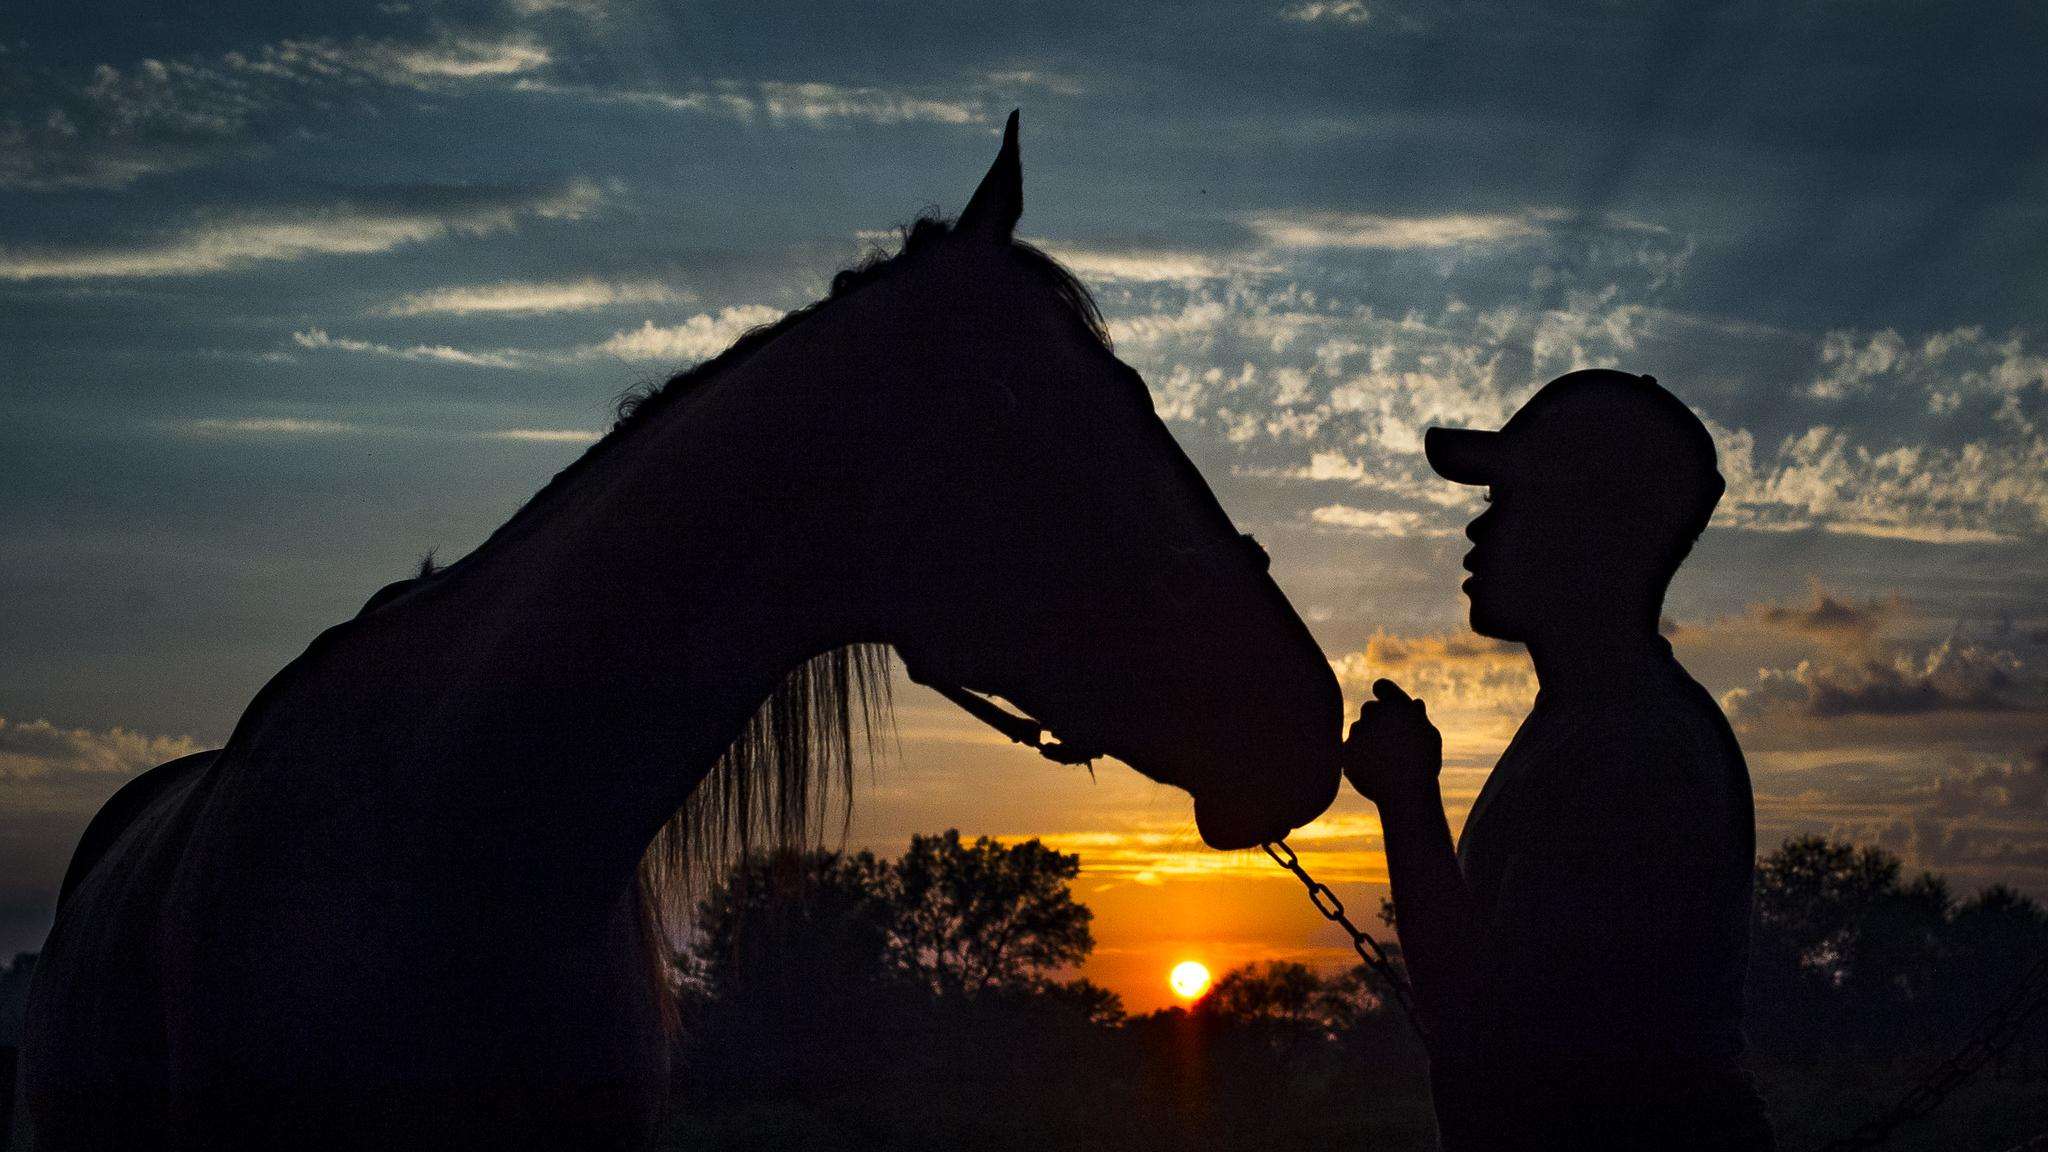 Horse and man silhouette at sunset.